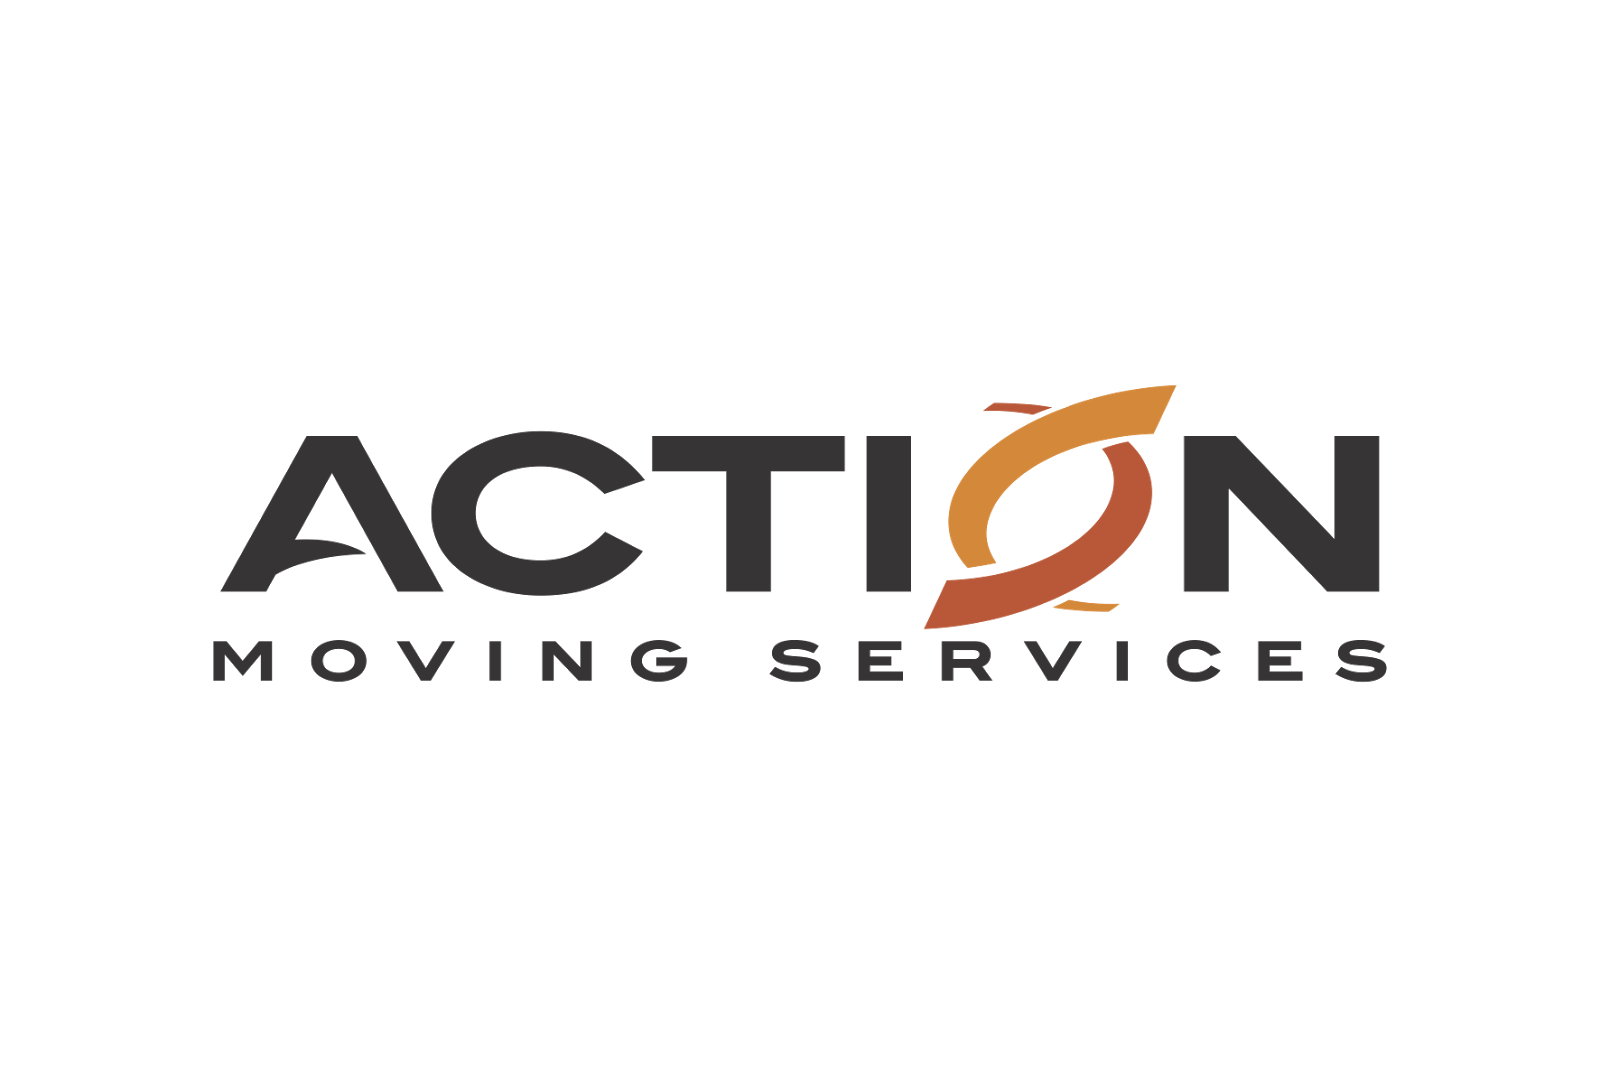 Action логотип. Action агентство. Action логотип вектор. Лого moving. Actions move